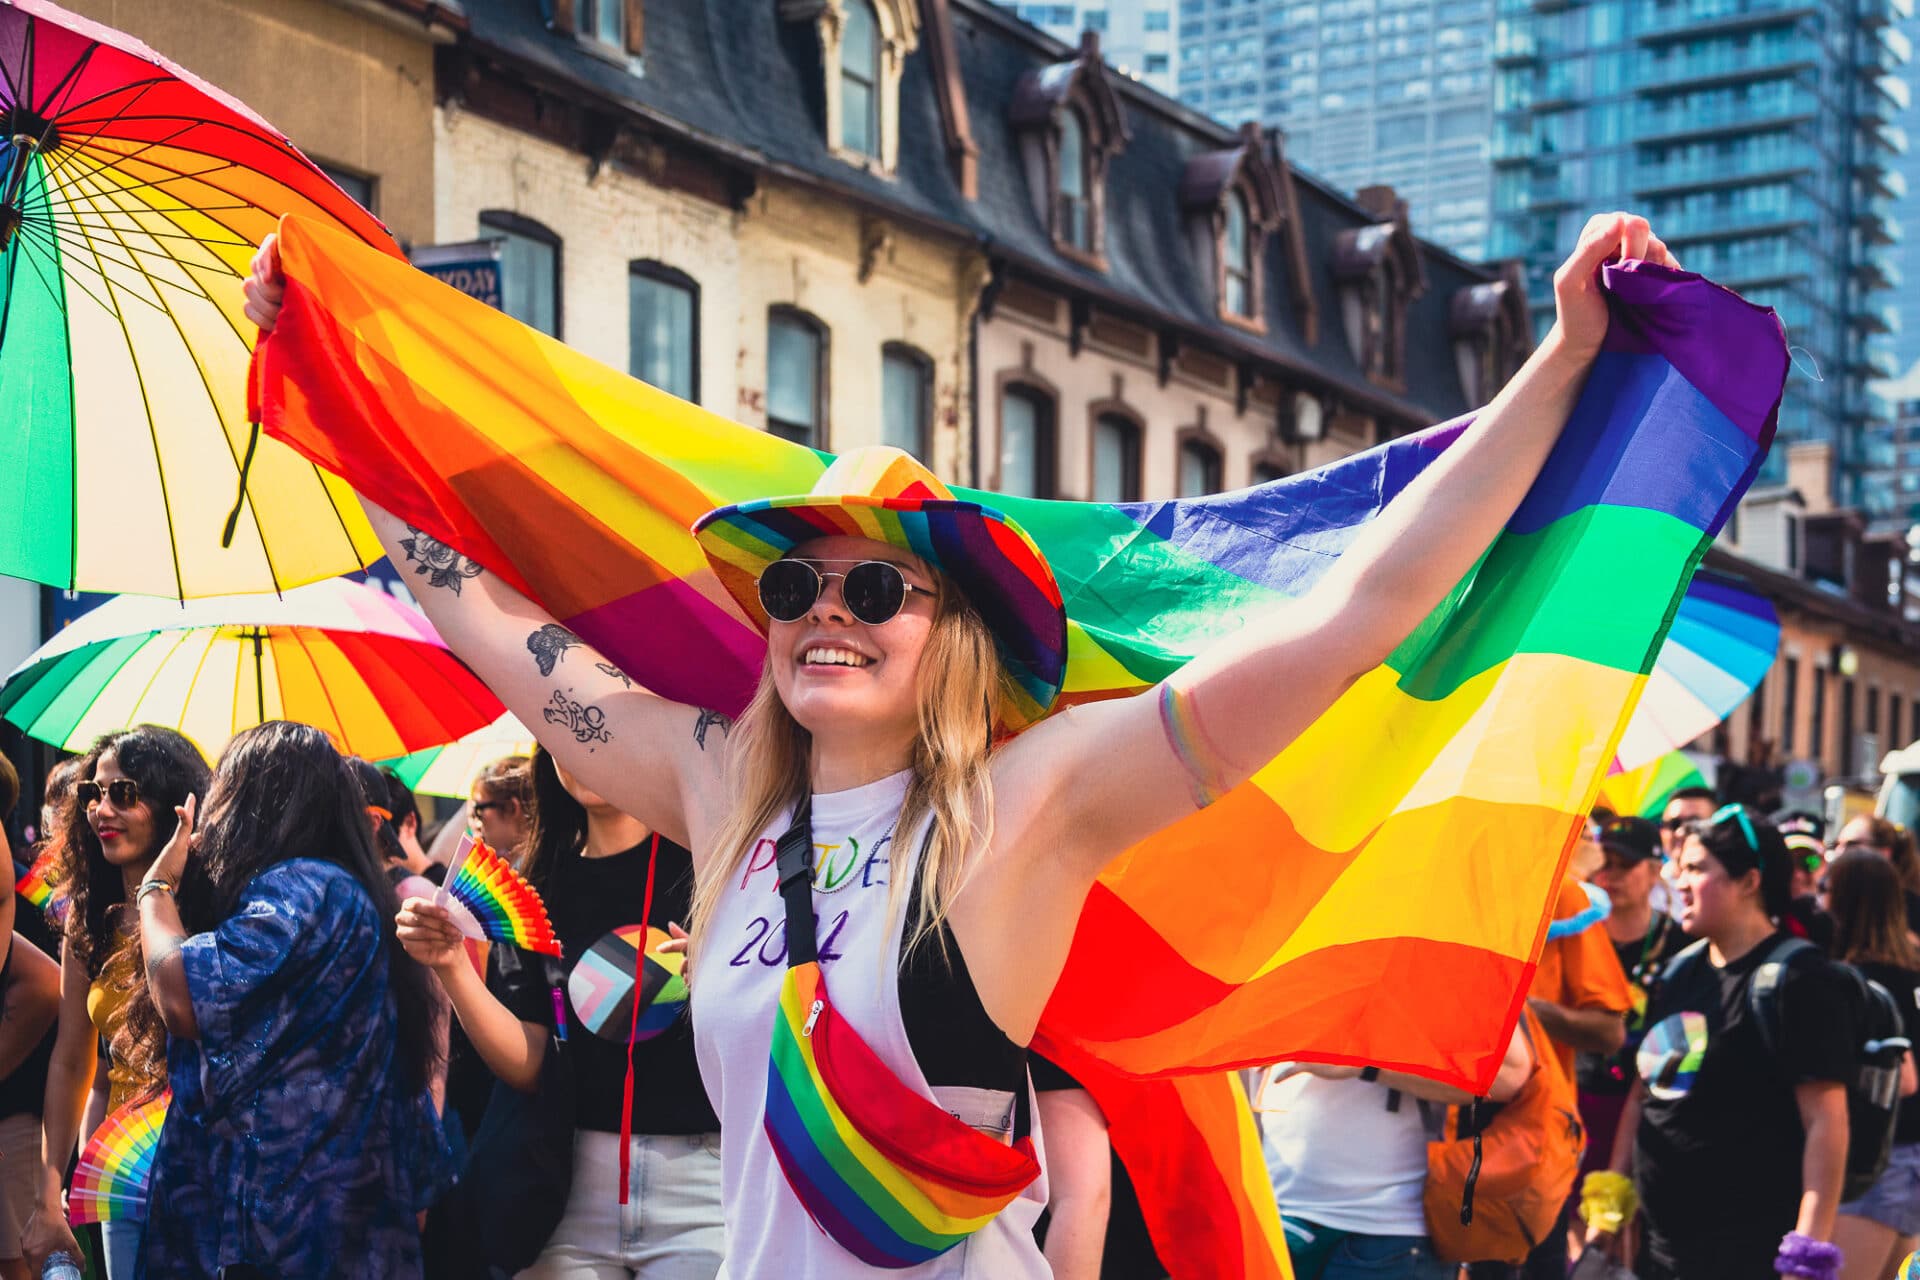 A person with long blonde hair, a rainbow cowboy hat and a rainbow fanny pack, holding a rainbow flag at the pride parade.